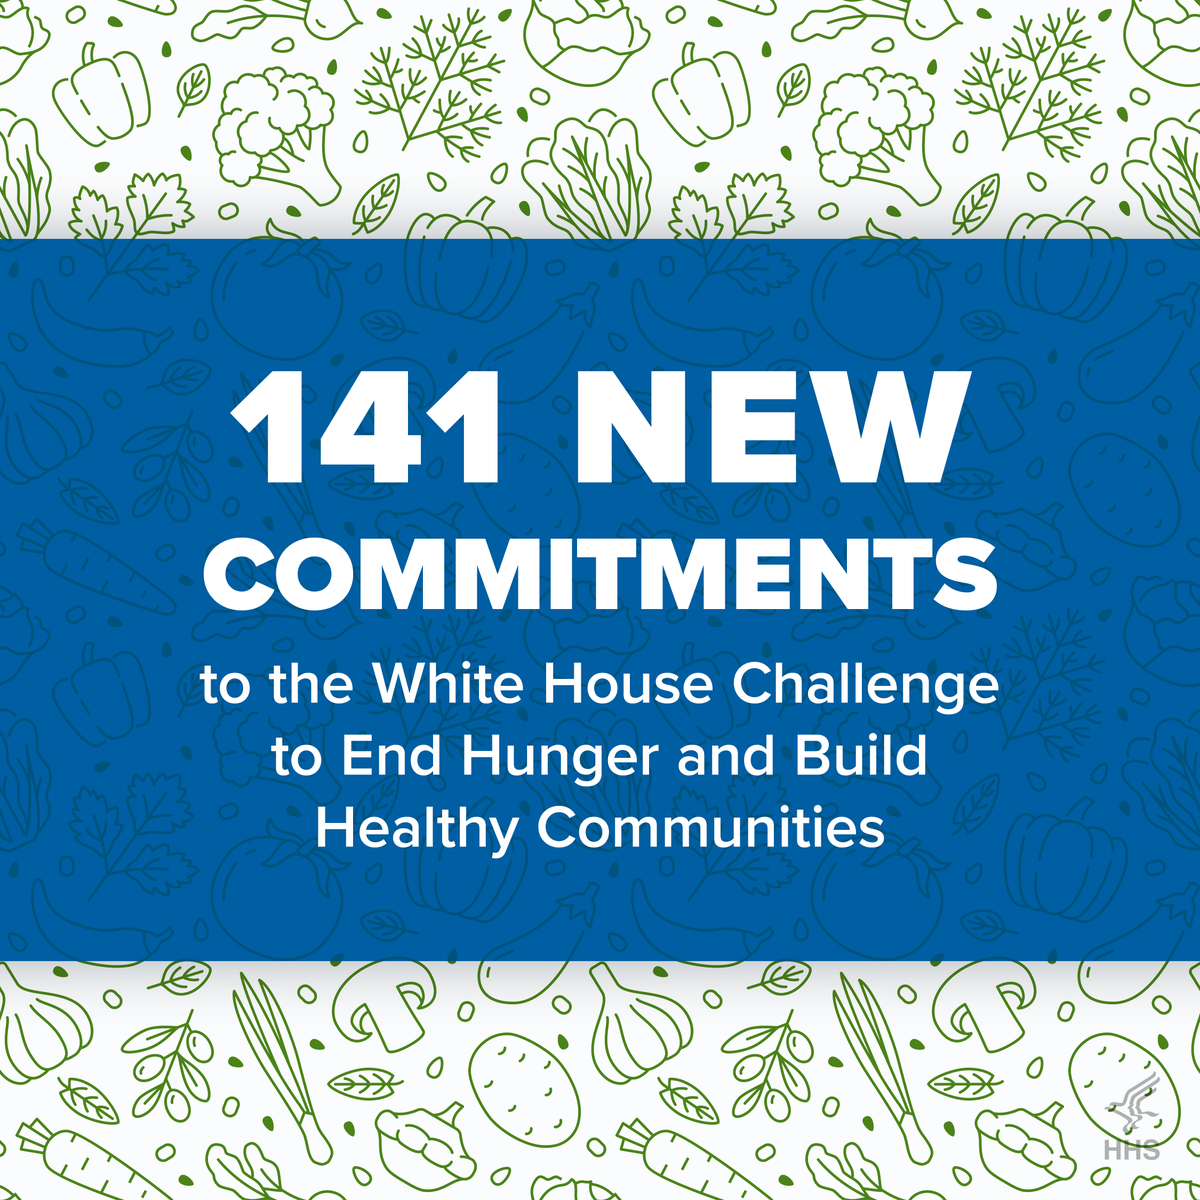 NEWS: Today, the Biden-Harris Administration announced 141 new commitments from stakeholders across the nation as part of the @WhiteHouse Challenge to End Hunger and Build Healthy Communities. Read more on the nearly $1.7B in new commitments: whitehouse.gov/briefing-room/…